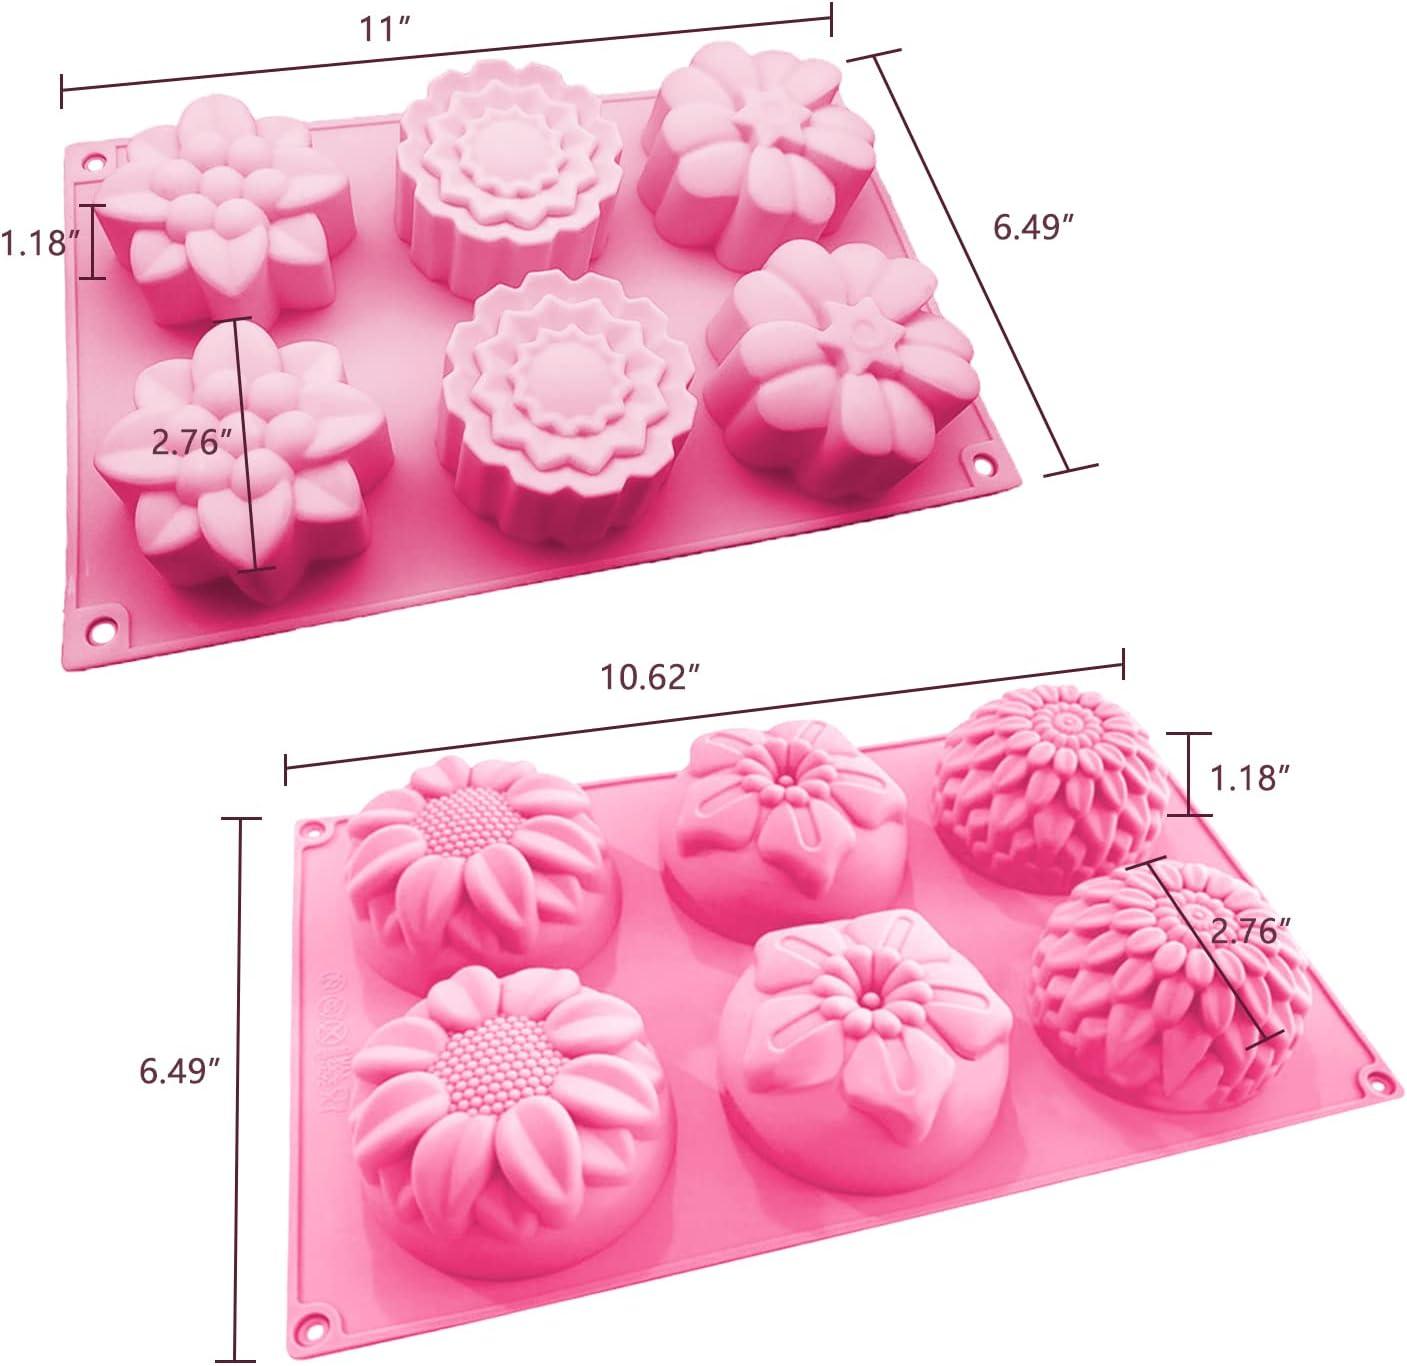 Rectangle Silicone Soap Cavities Molds, DIY Handmade Soap Making